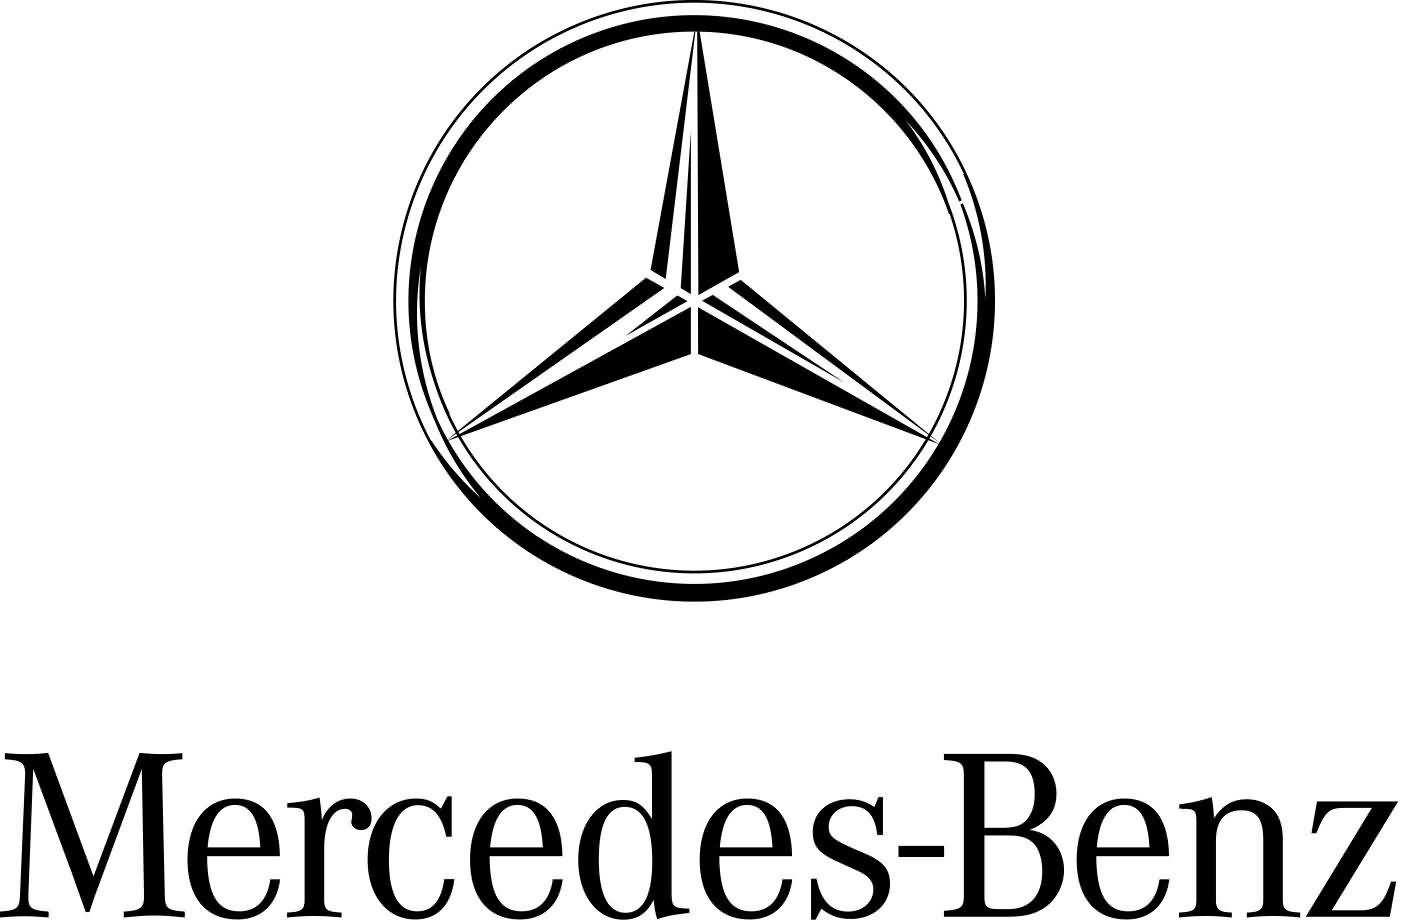 I Has Triangle Logo - Mercedes Logo, Mercedes-Benz Car Symbol Meaning and History | Car ...